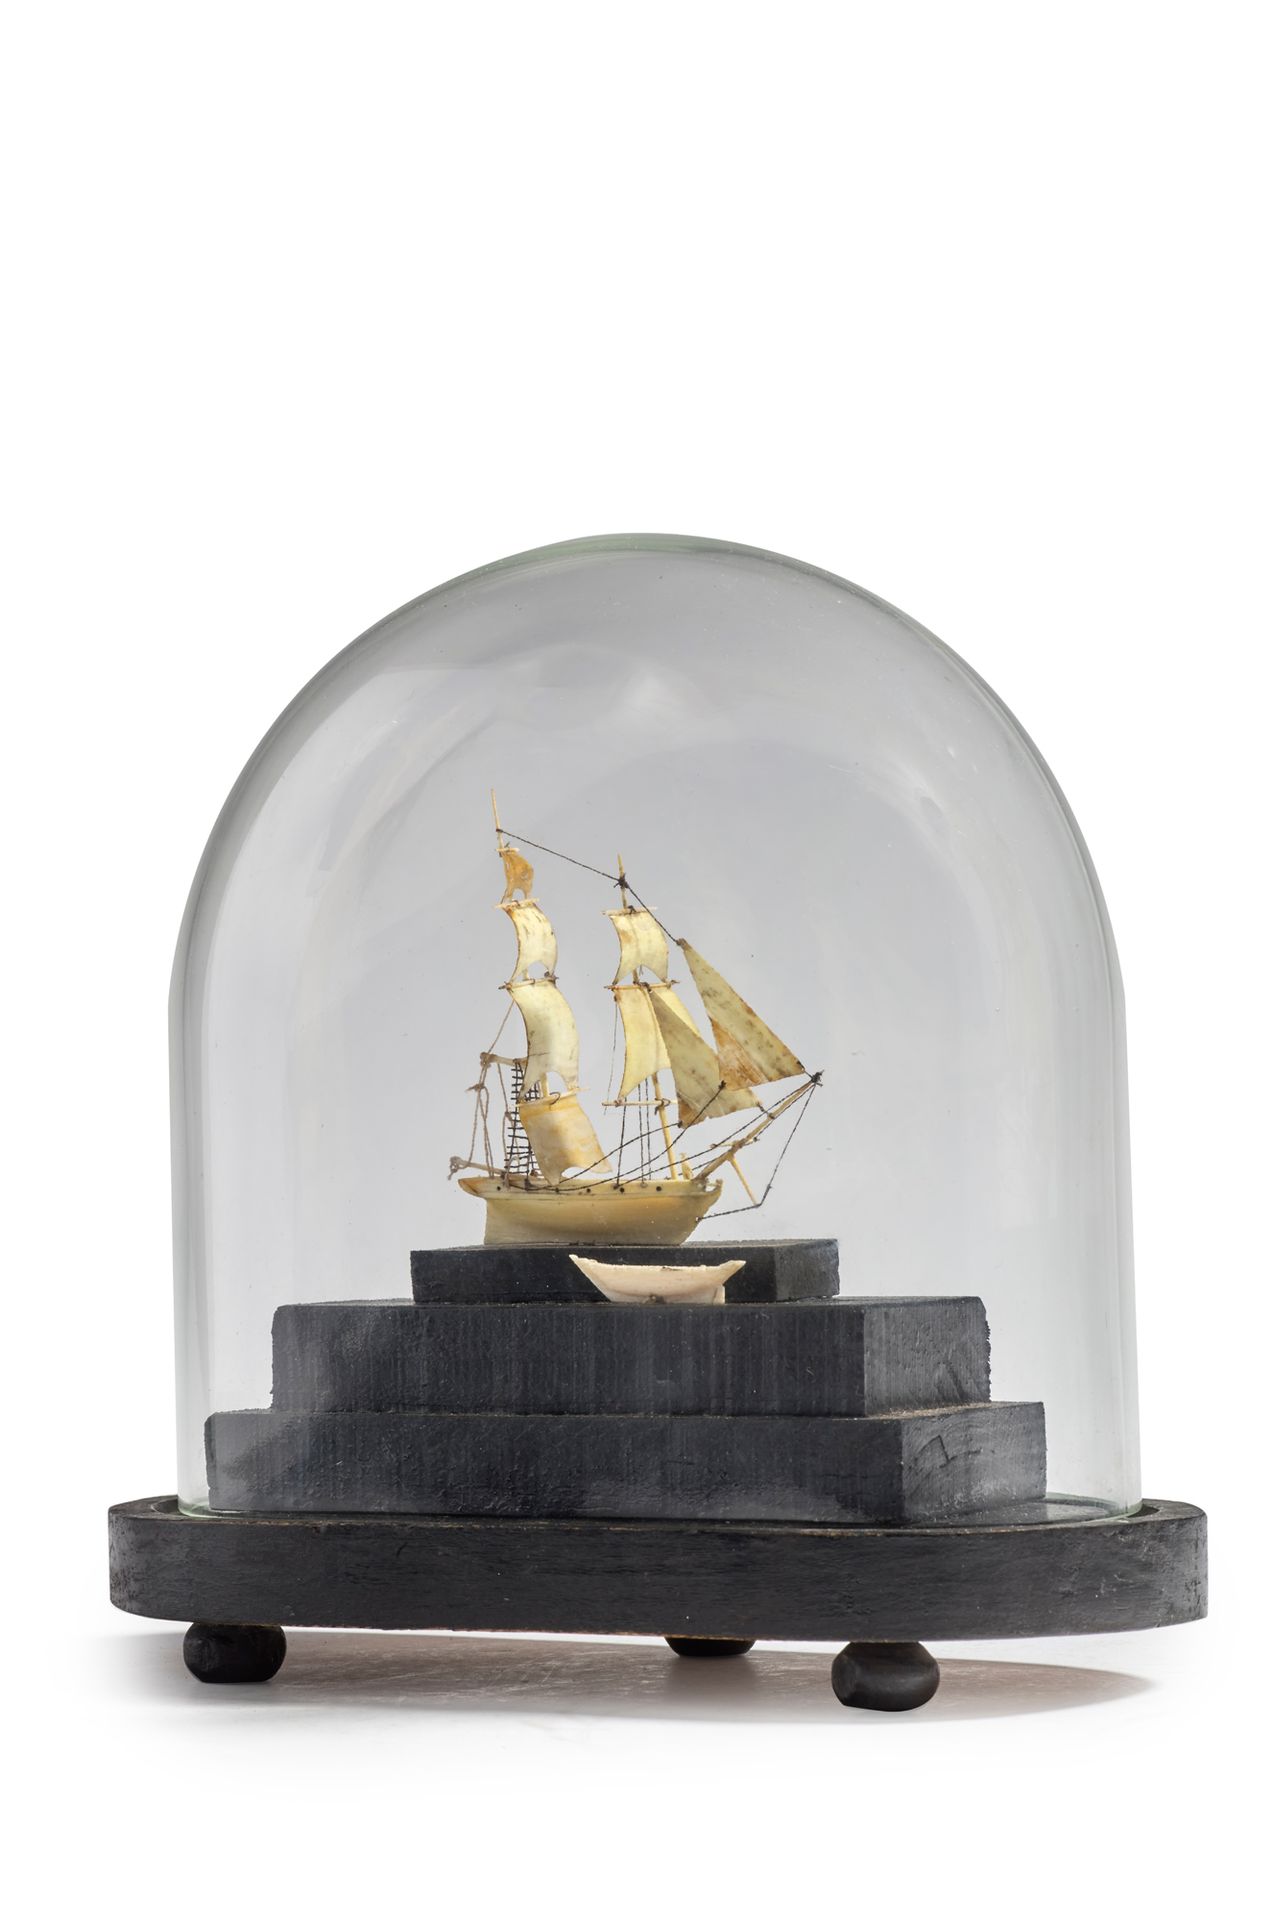 Null 
* Frigate and canoe in ivory under globe

Dieppe, early 19th century 

Tot&hellip;